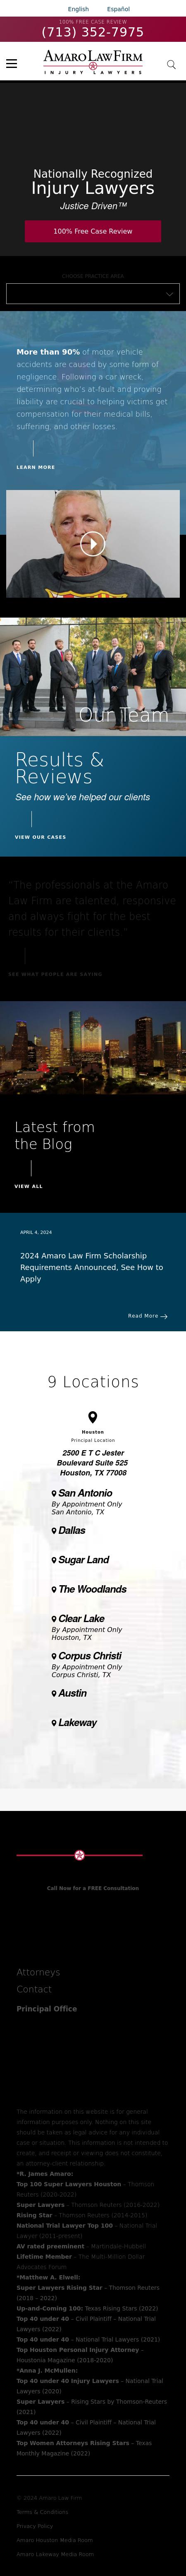 Amaro Law Firm - The Woodlands TX Lawyers